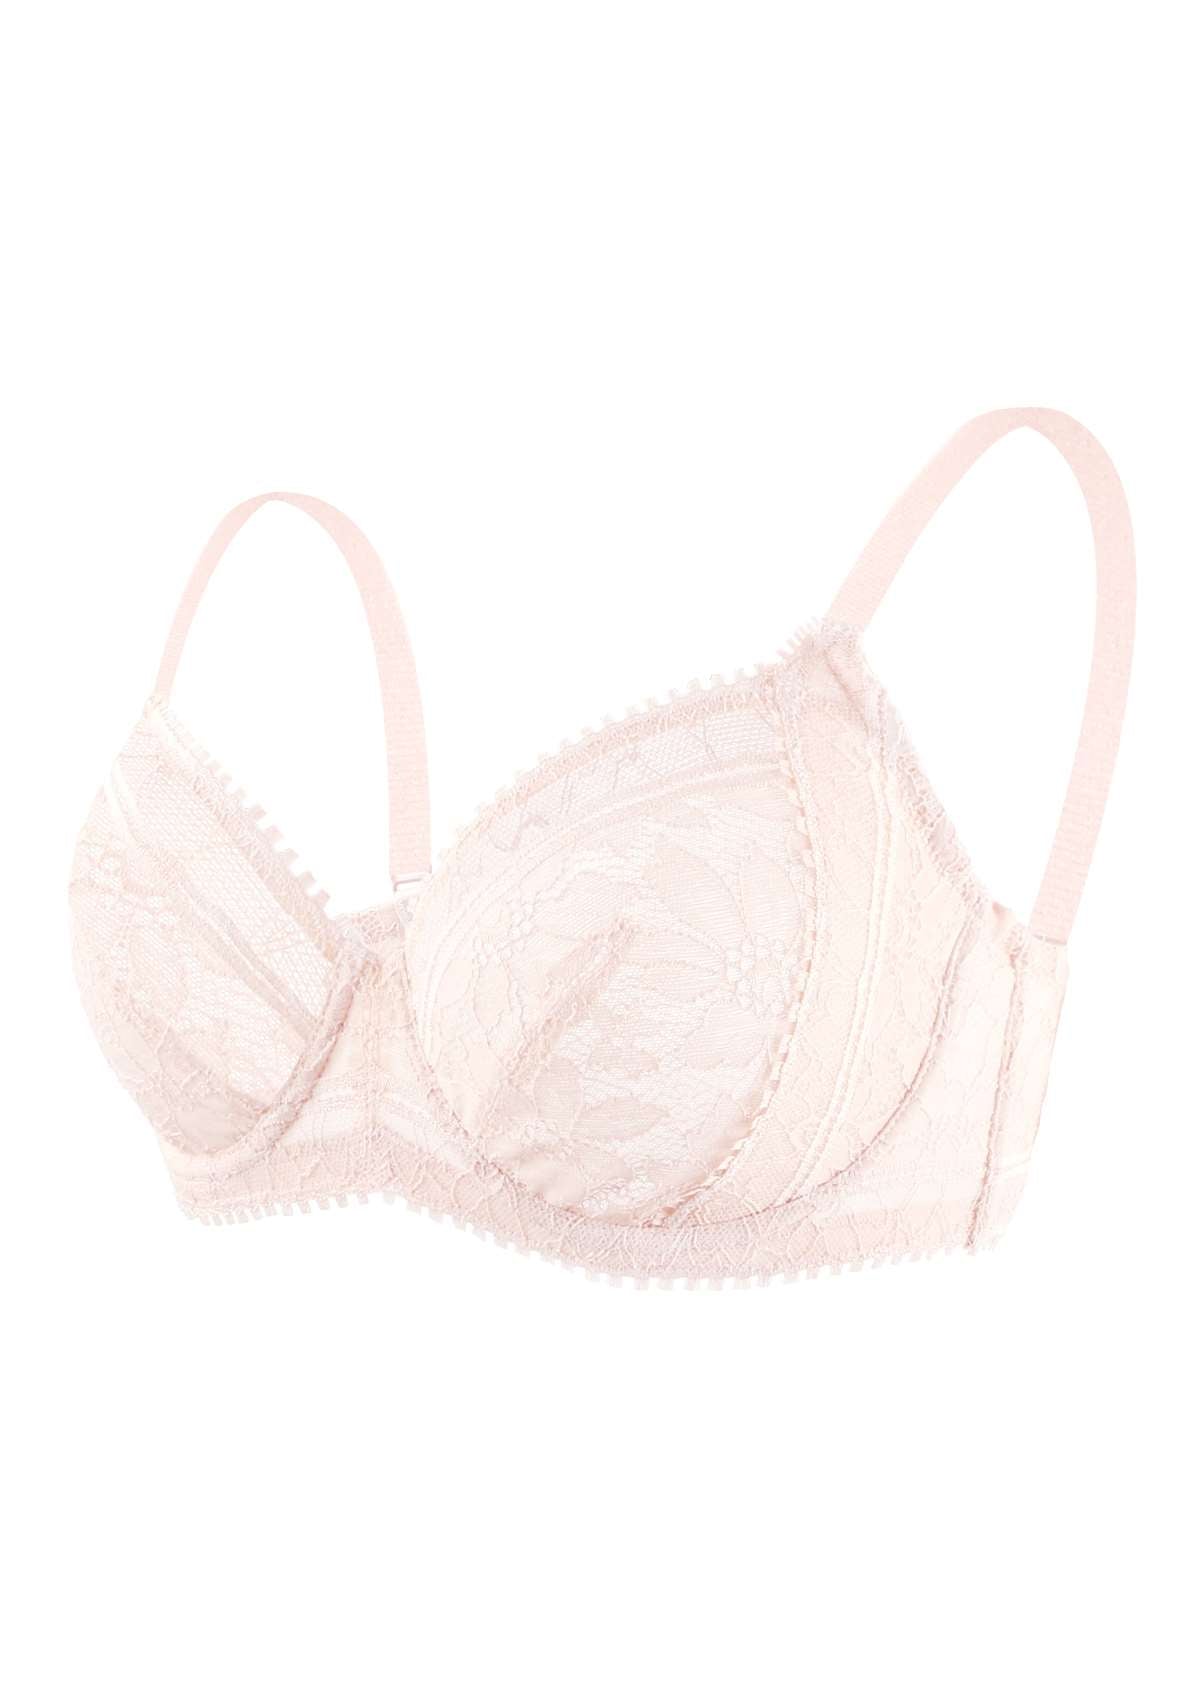 HSIA Silene Floral Delicate Unlined Lace Soft Cup Uplift Bra - Champagne / 38 / D